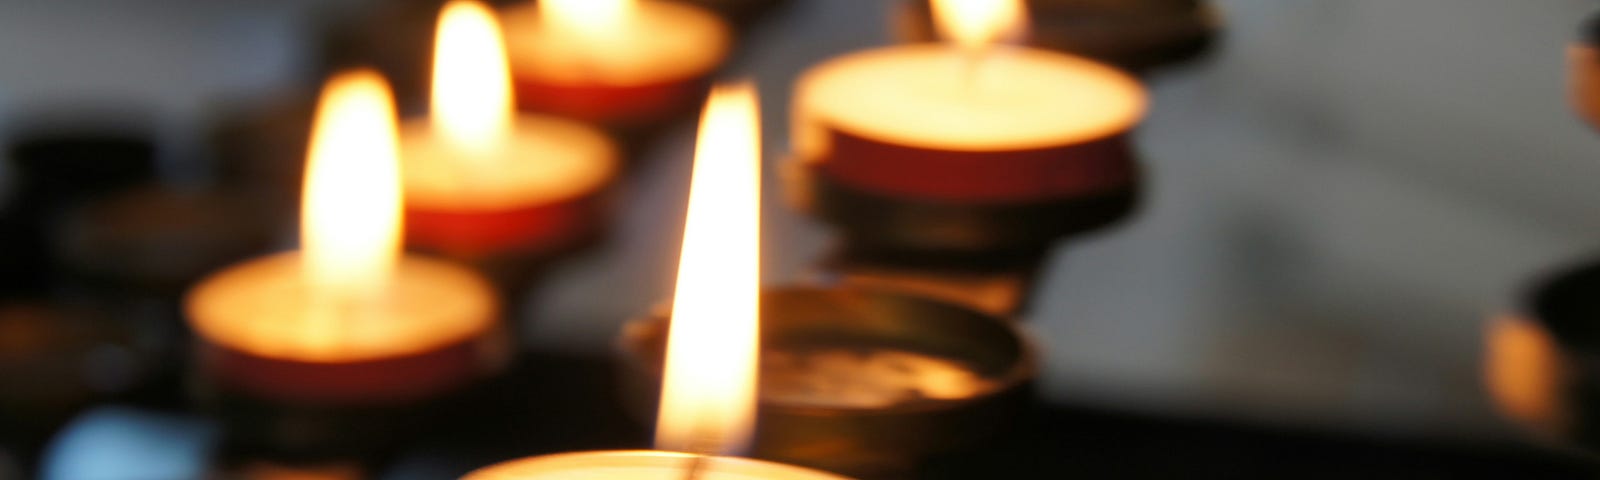 Votive candles on an alter